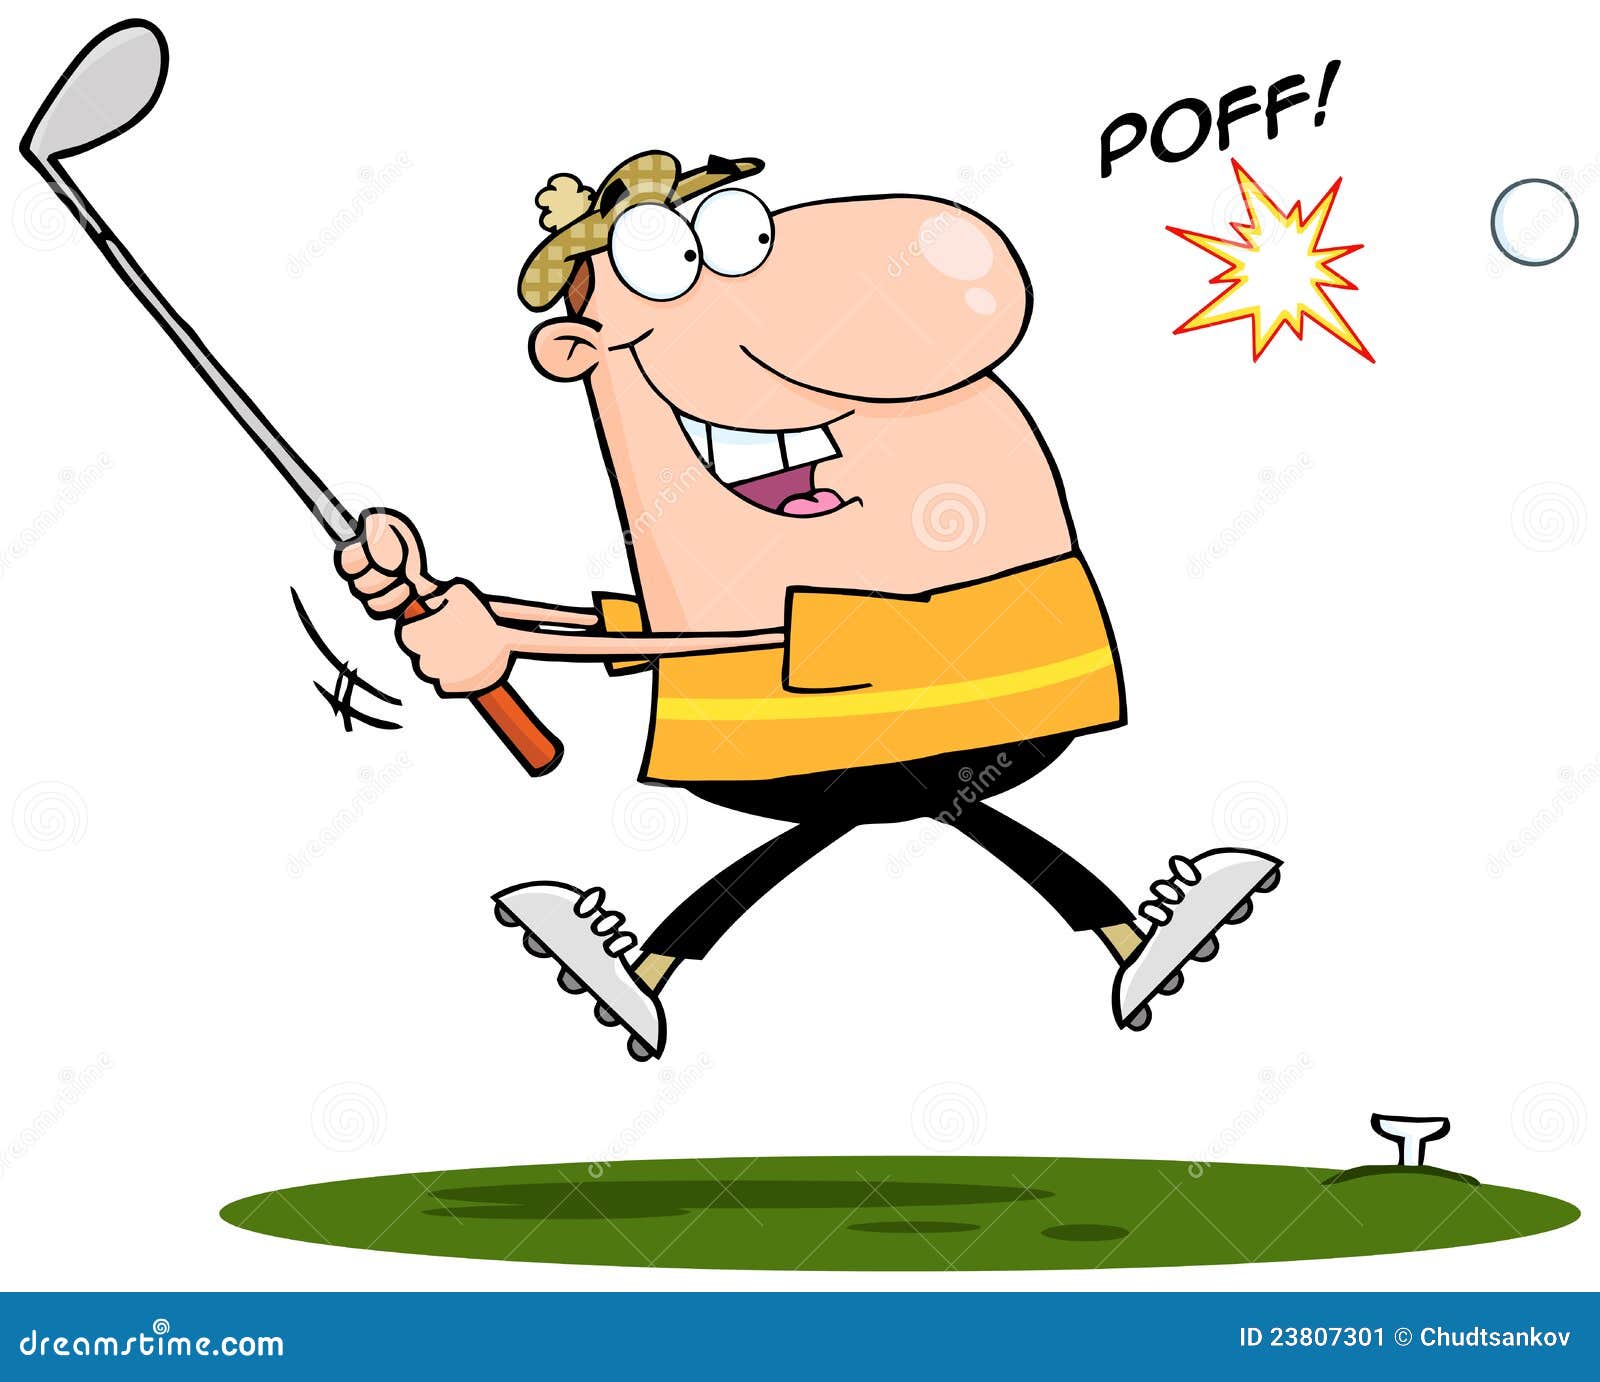 clipart man playing golf - photo #37